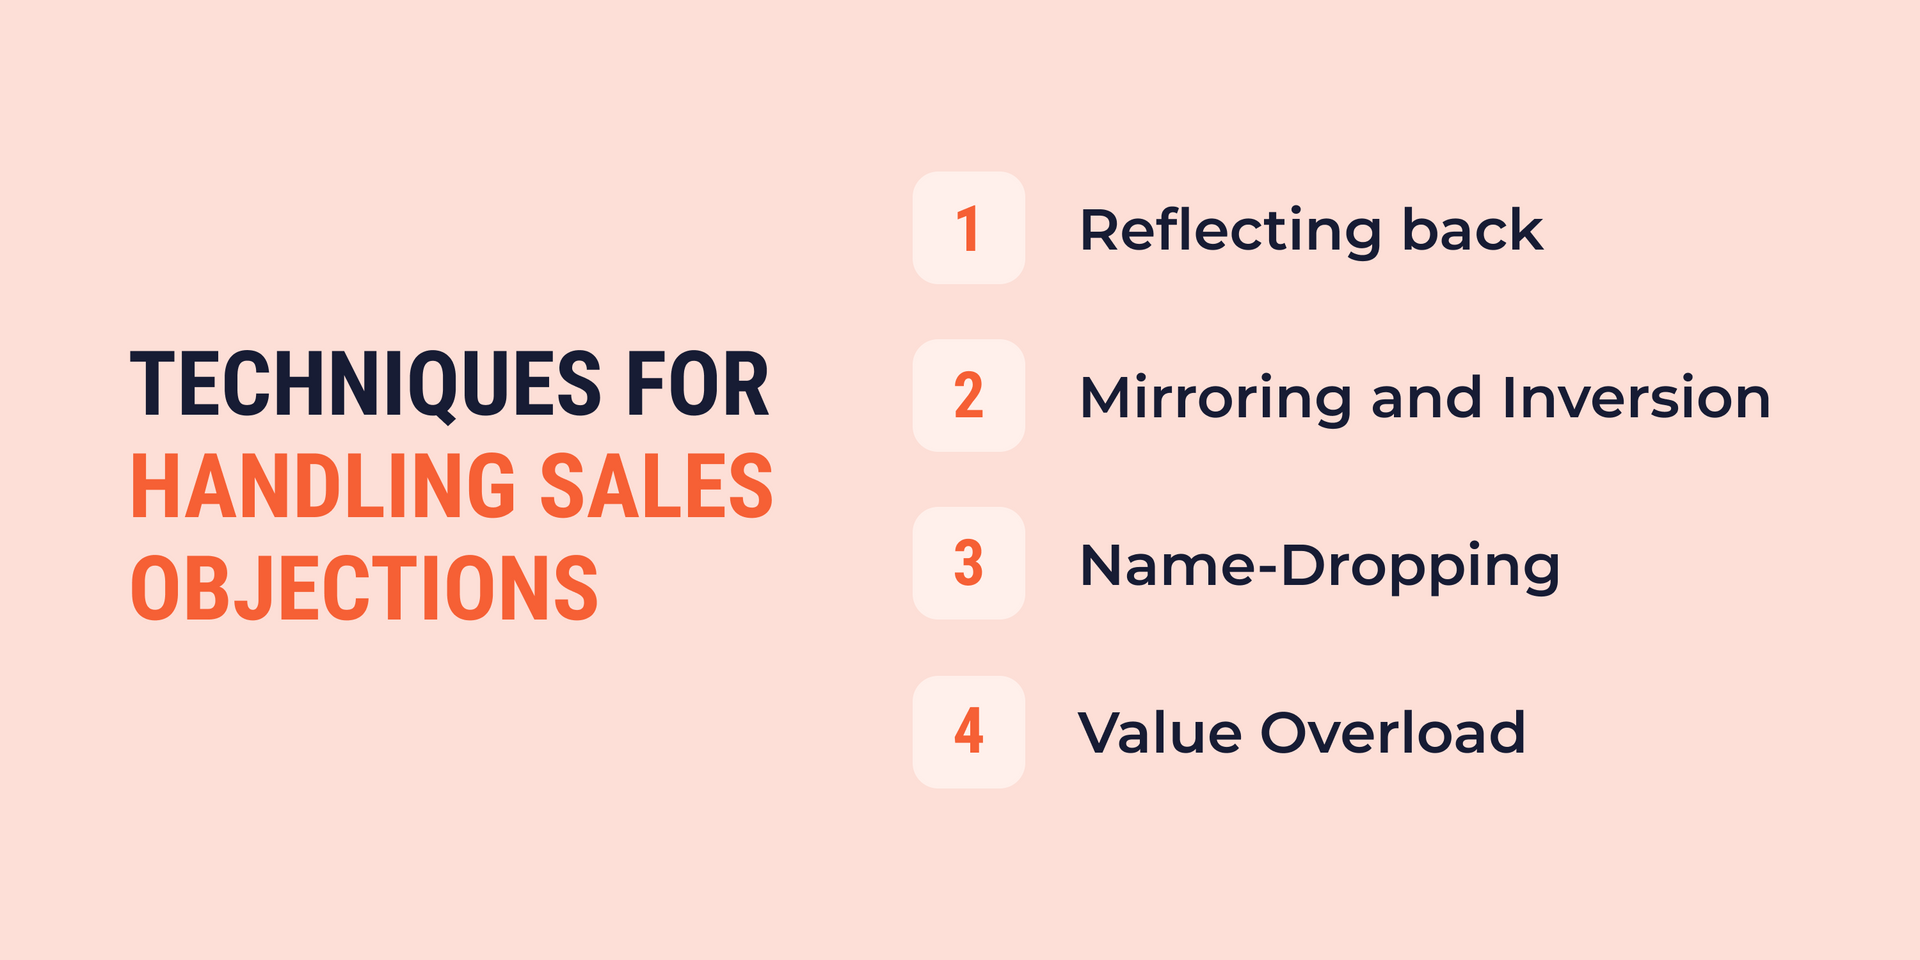 a list of techniques for handling sales objections including reflecting back , mirroring and inversion , name dropping and value overload .